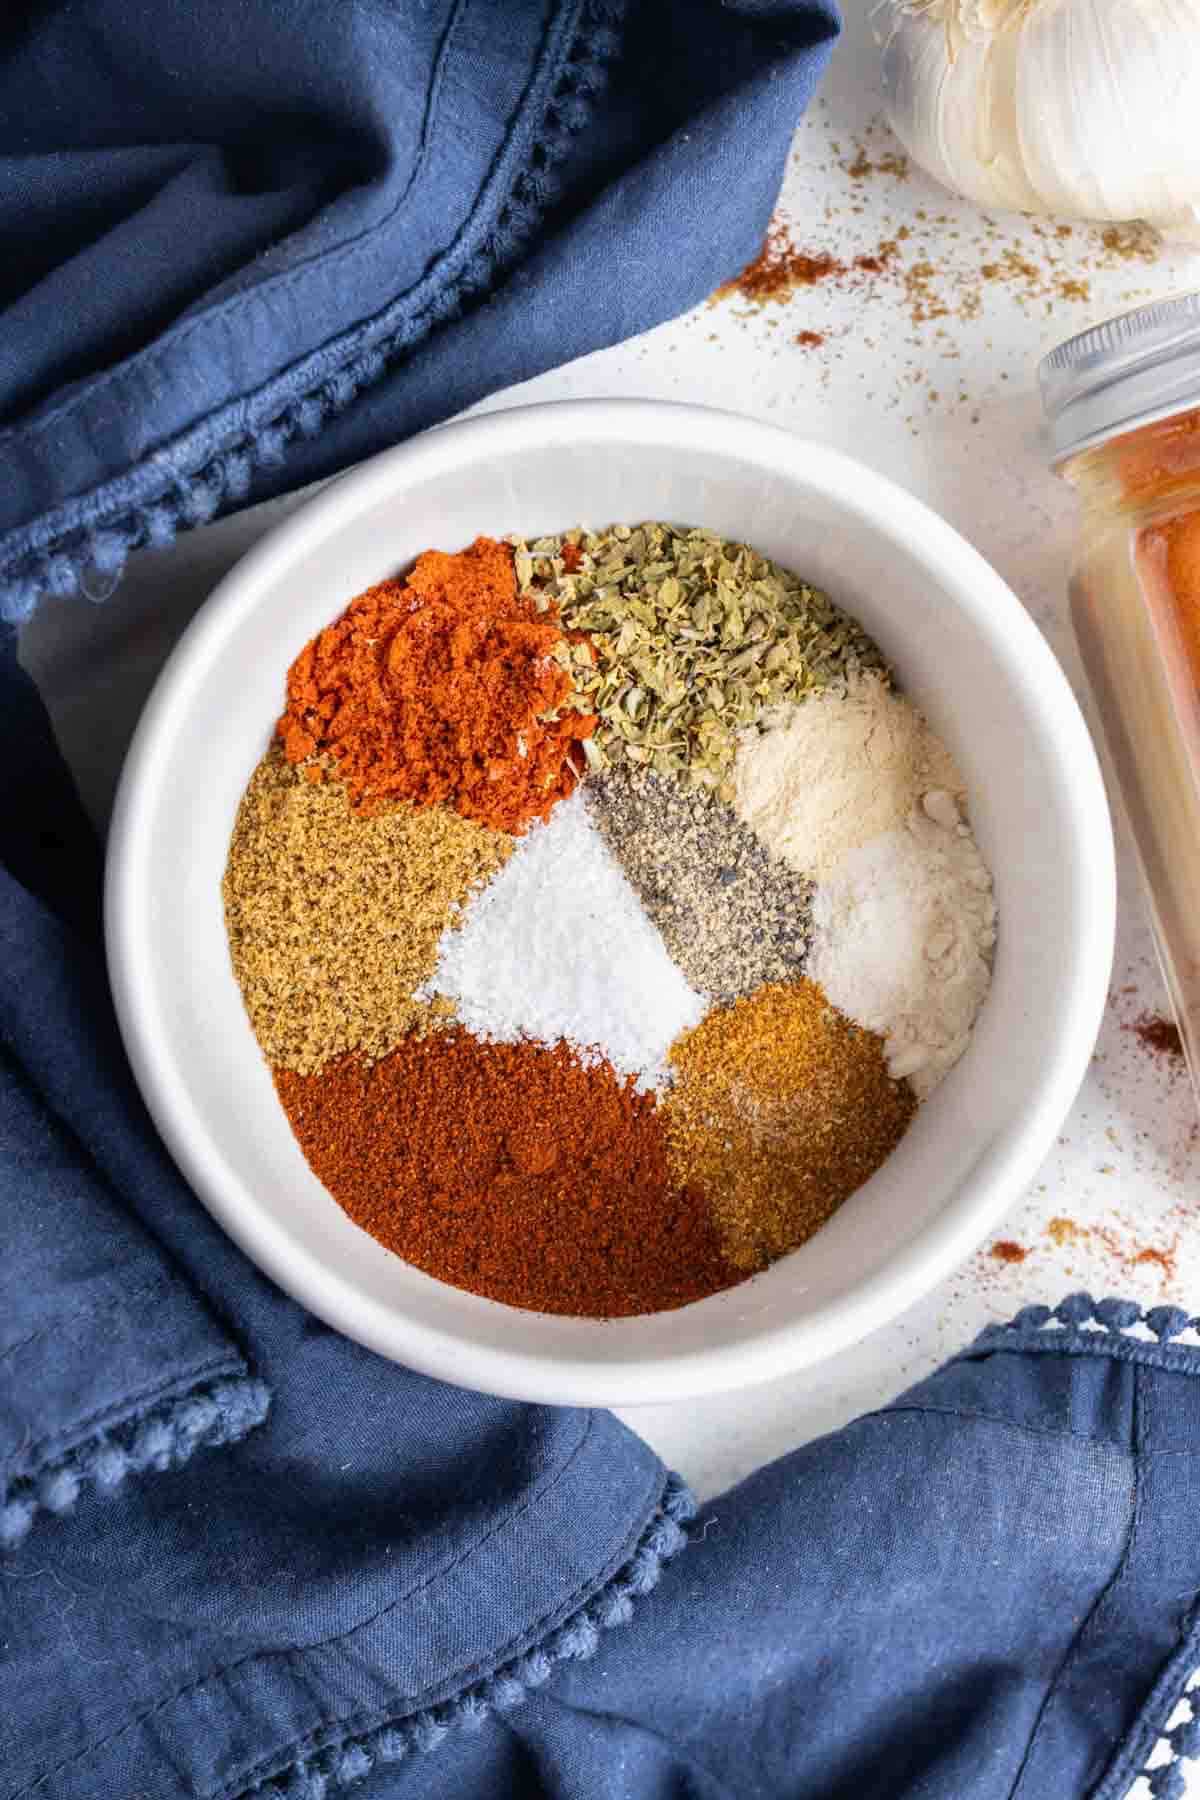 A bowl of different seasonings is shown on the counter.